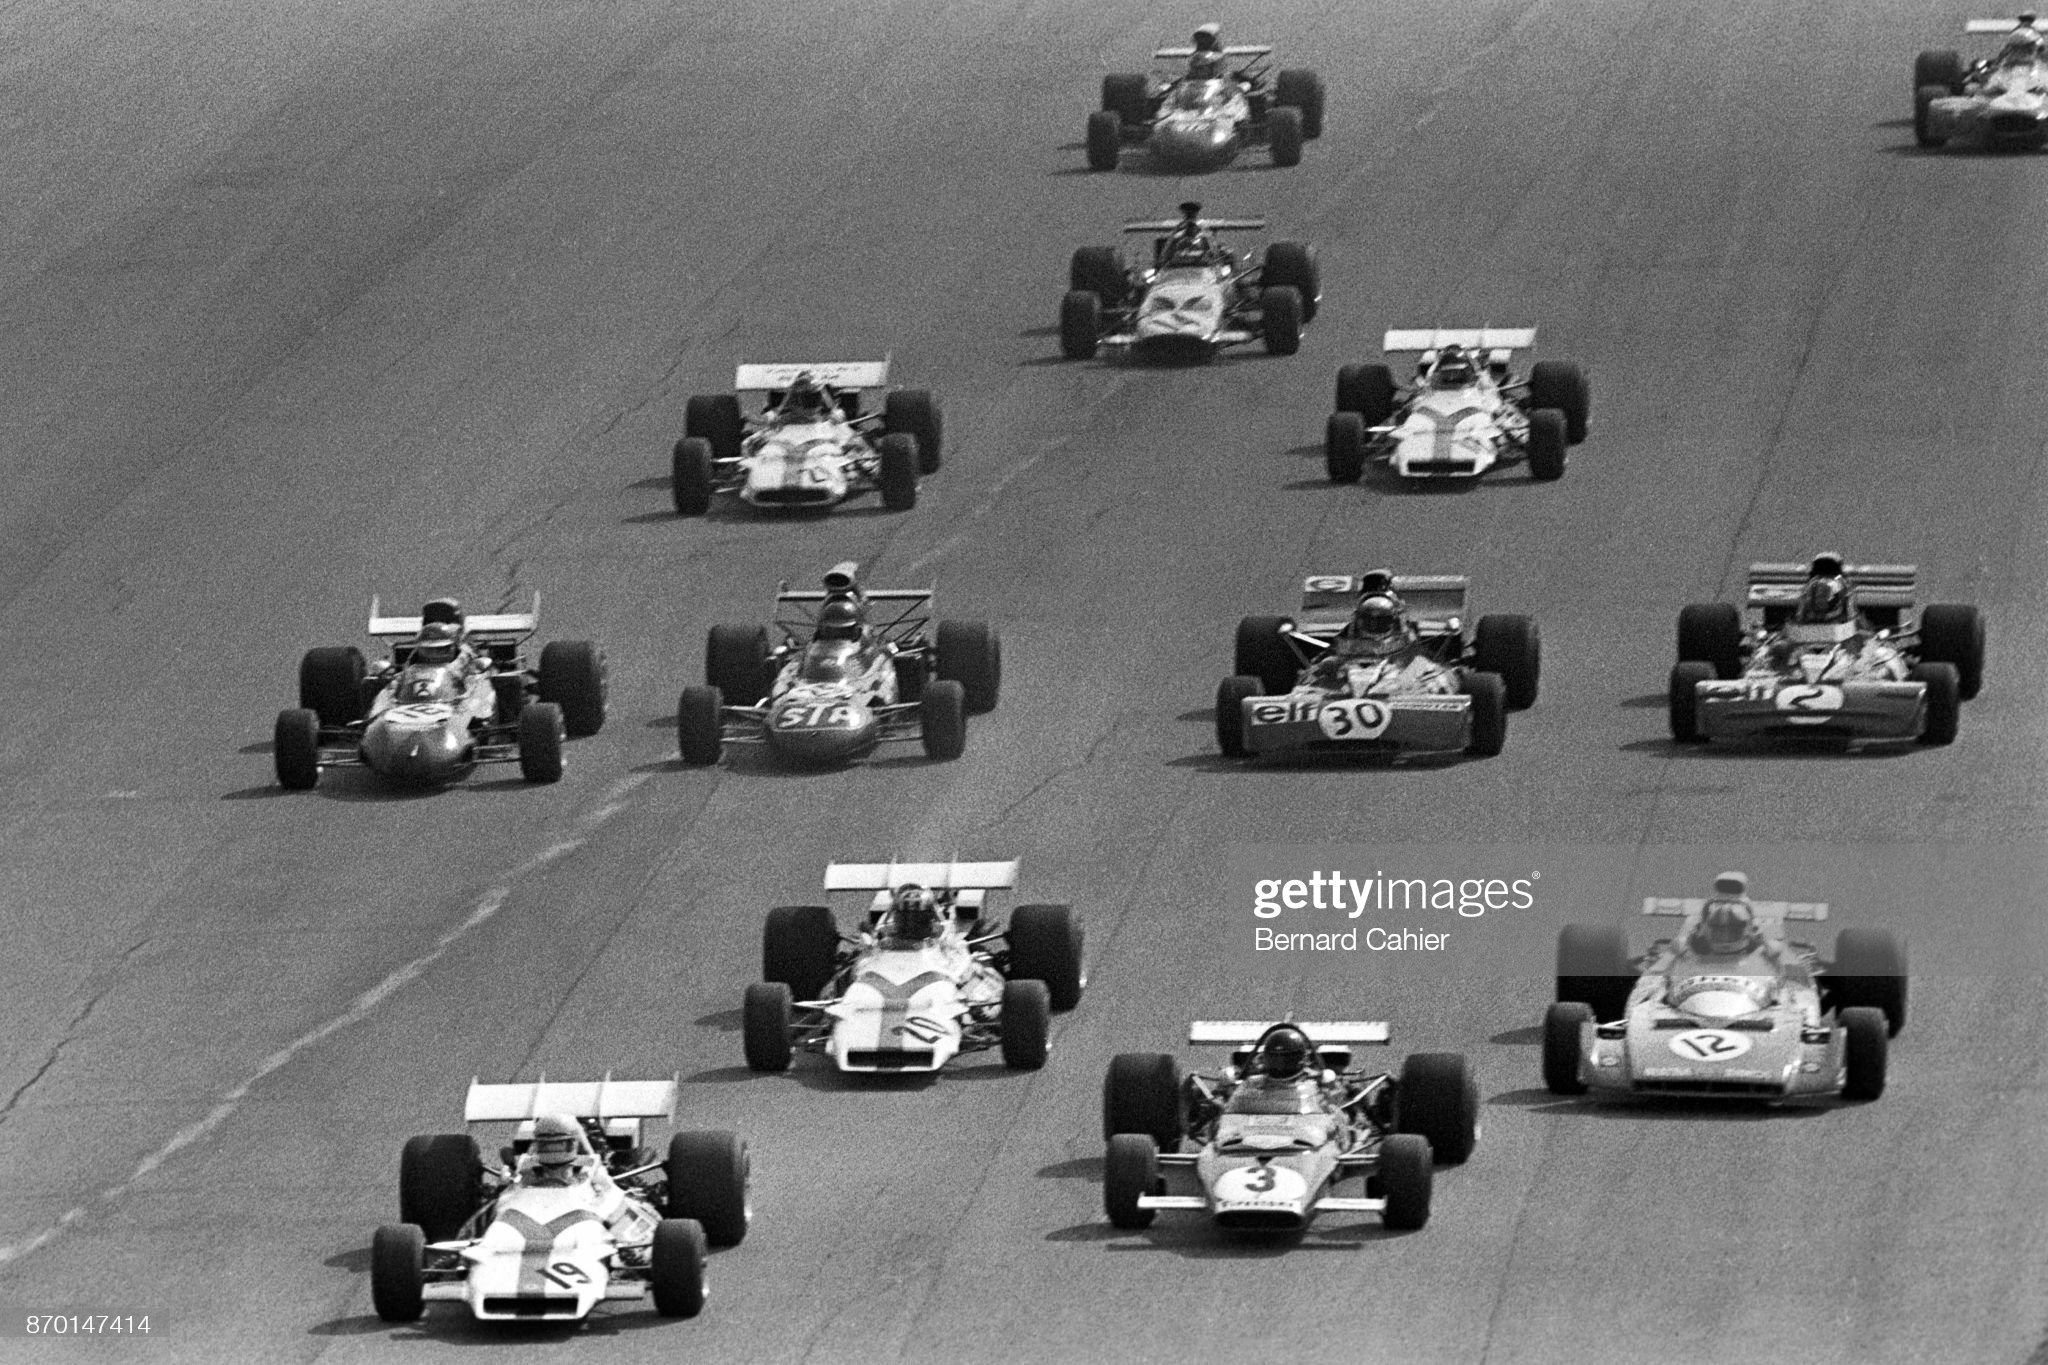 Howden Ganley, Jo Siffert, Jacky Ickx, Chris Amon, BRM P160, Ferrari 312B2, Grand Prix of Italy, Autodromo Nazionale Monza, 05 September 1971. Start of the race with Howden Ganley in the lead. 